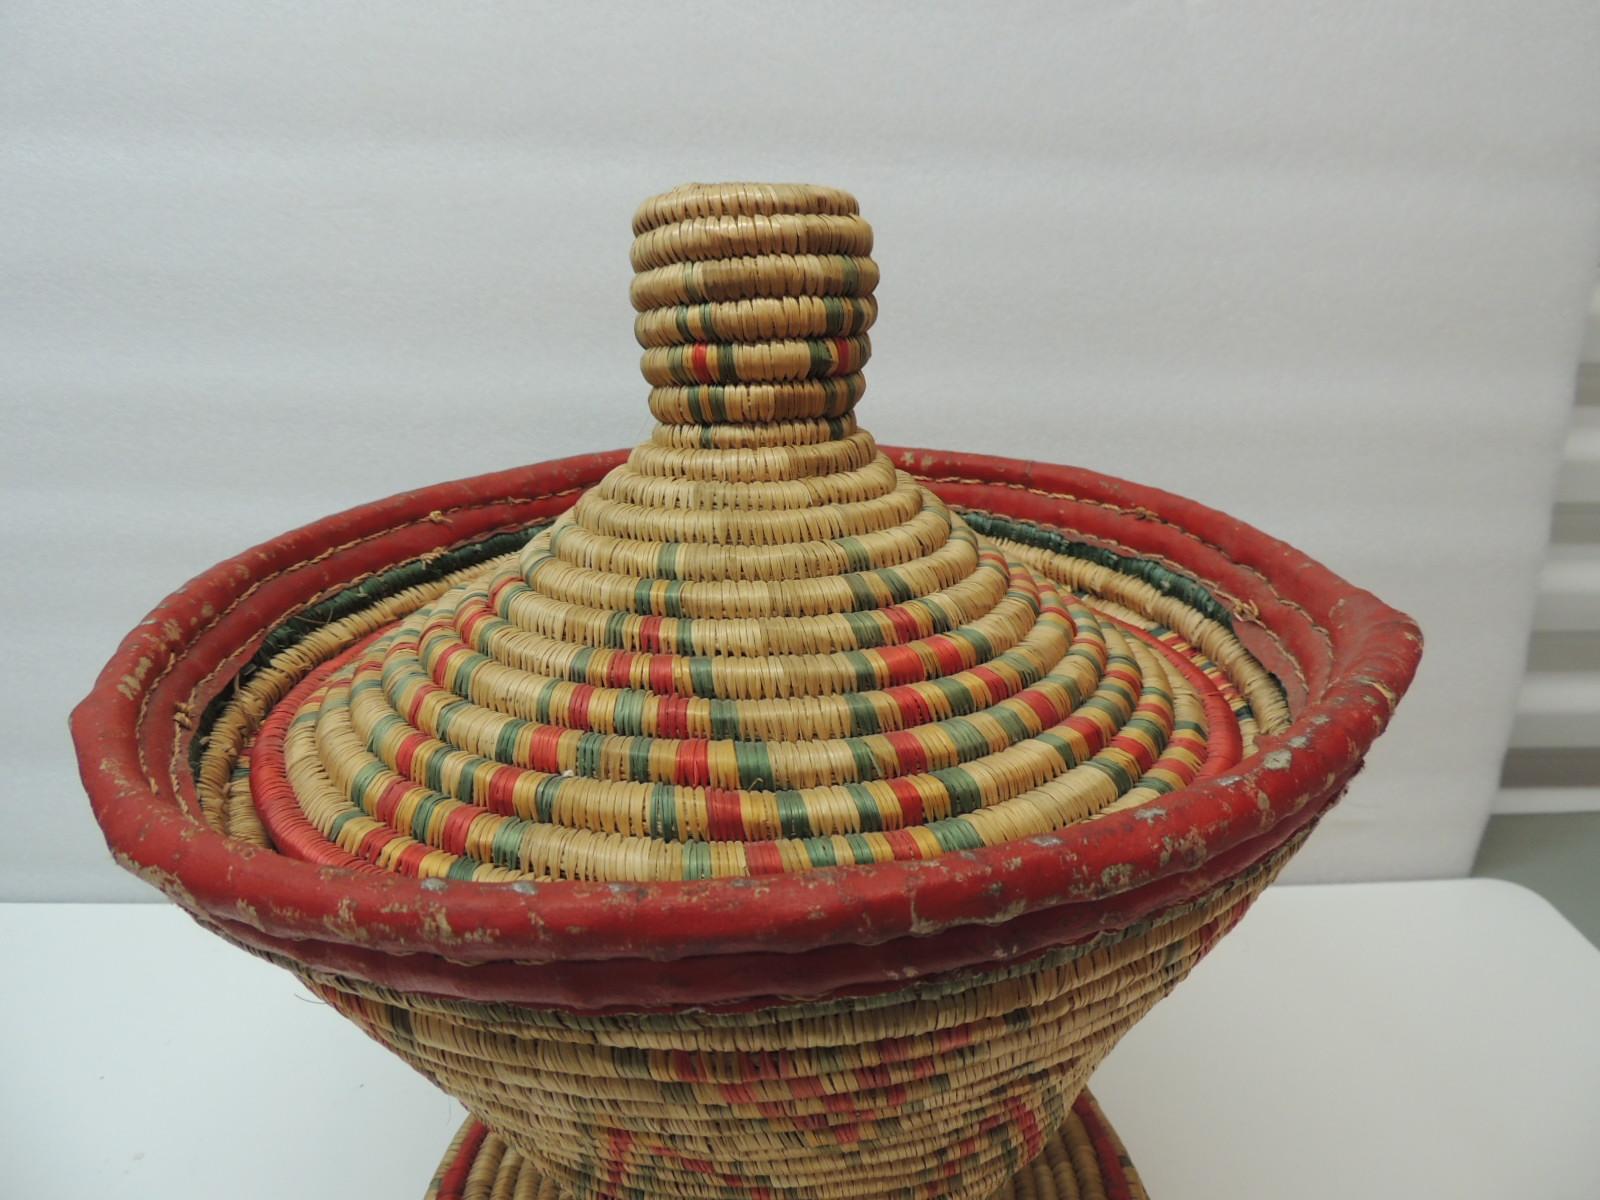 Vintage colorful African round basket with Lid. Round handwoven artisanal basket.
In shades of orange, red and blue.
Size: 13